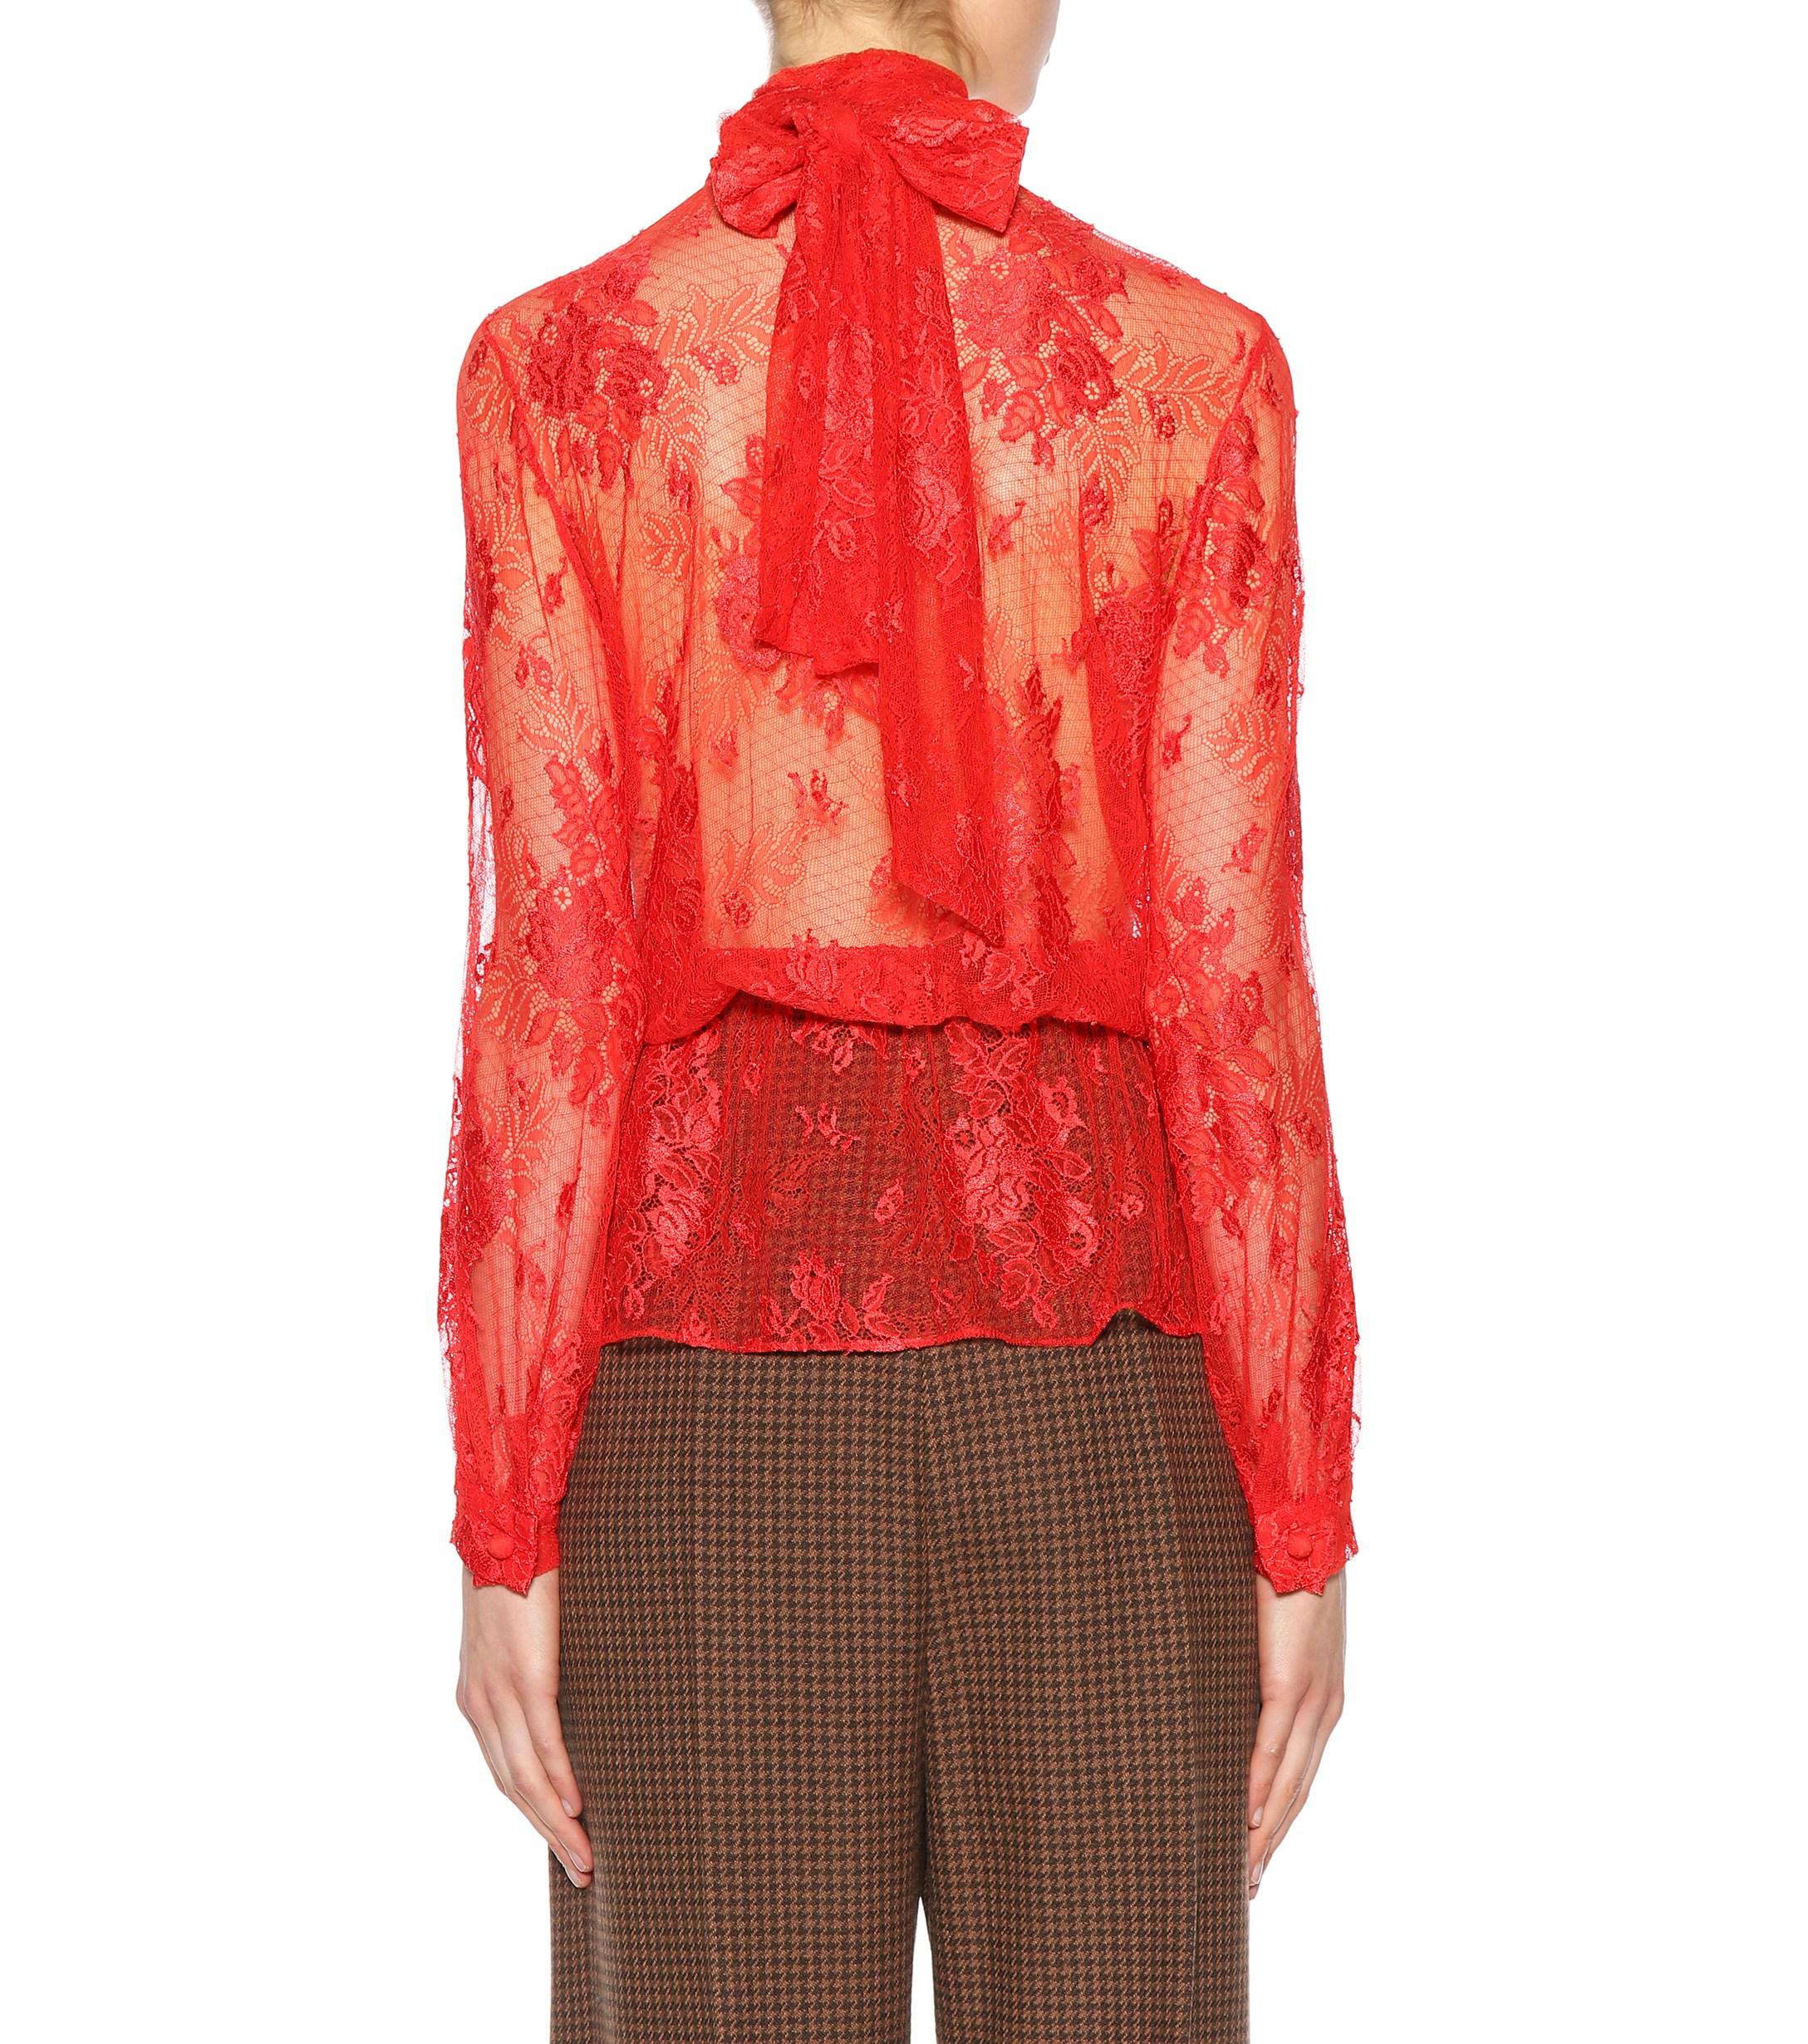 Balenciaga Lace Blouse in Red | Lyst